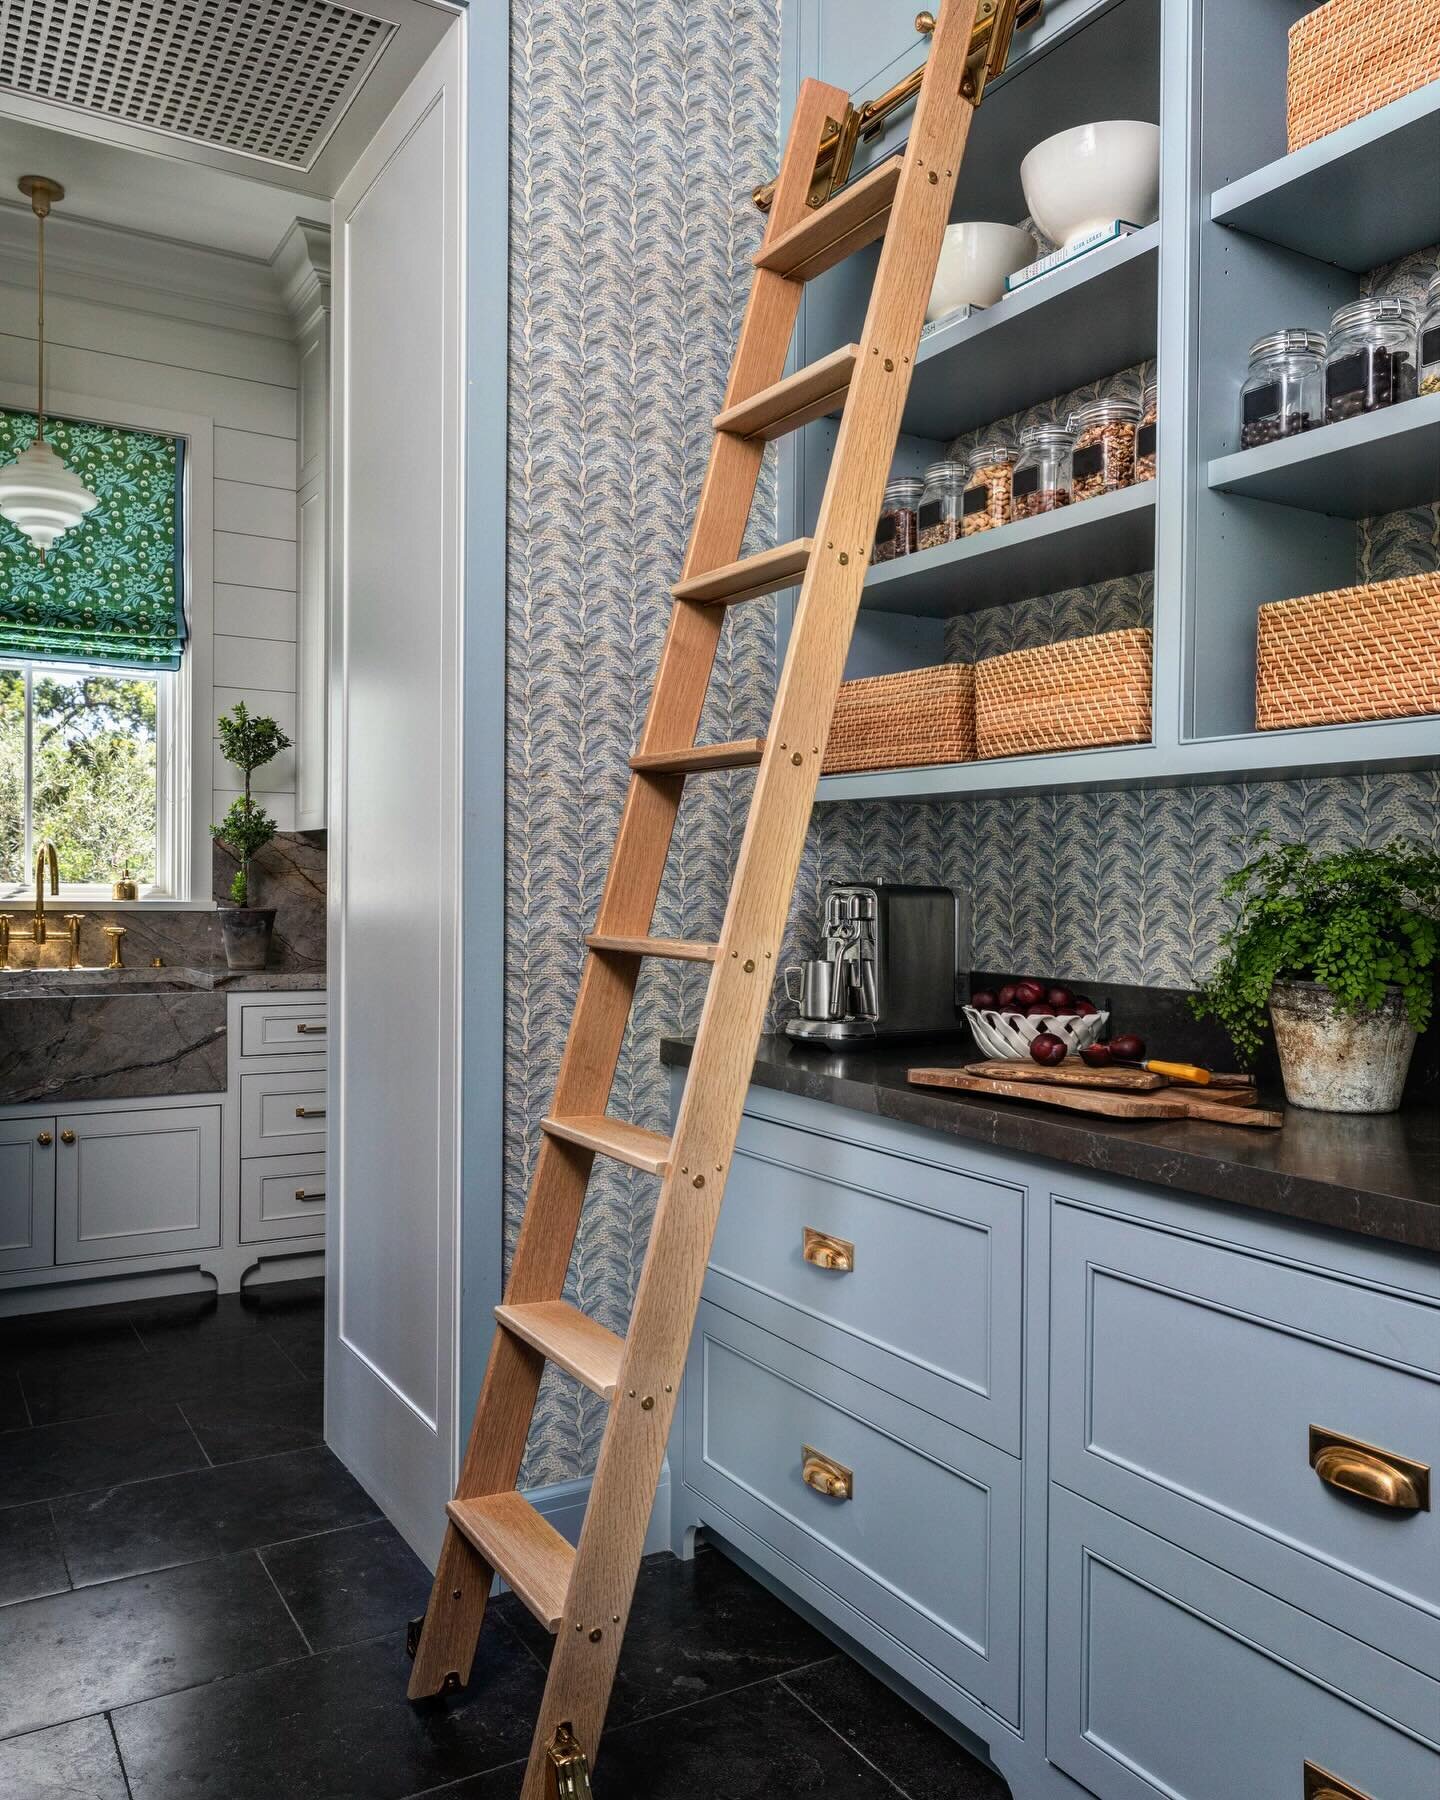 Rolling library ladders aren&rsquo;t just for libraries!  A stunning pantry by @shotzeliuzzi and @reagan_andre_architecture . Photos by @juliesoefer. 

What do you dream of?  We should be working together!  Call us. 

#libraryladder #rollingladder #p